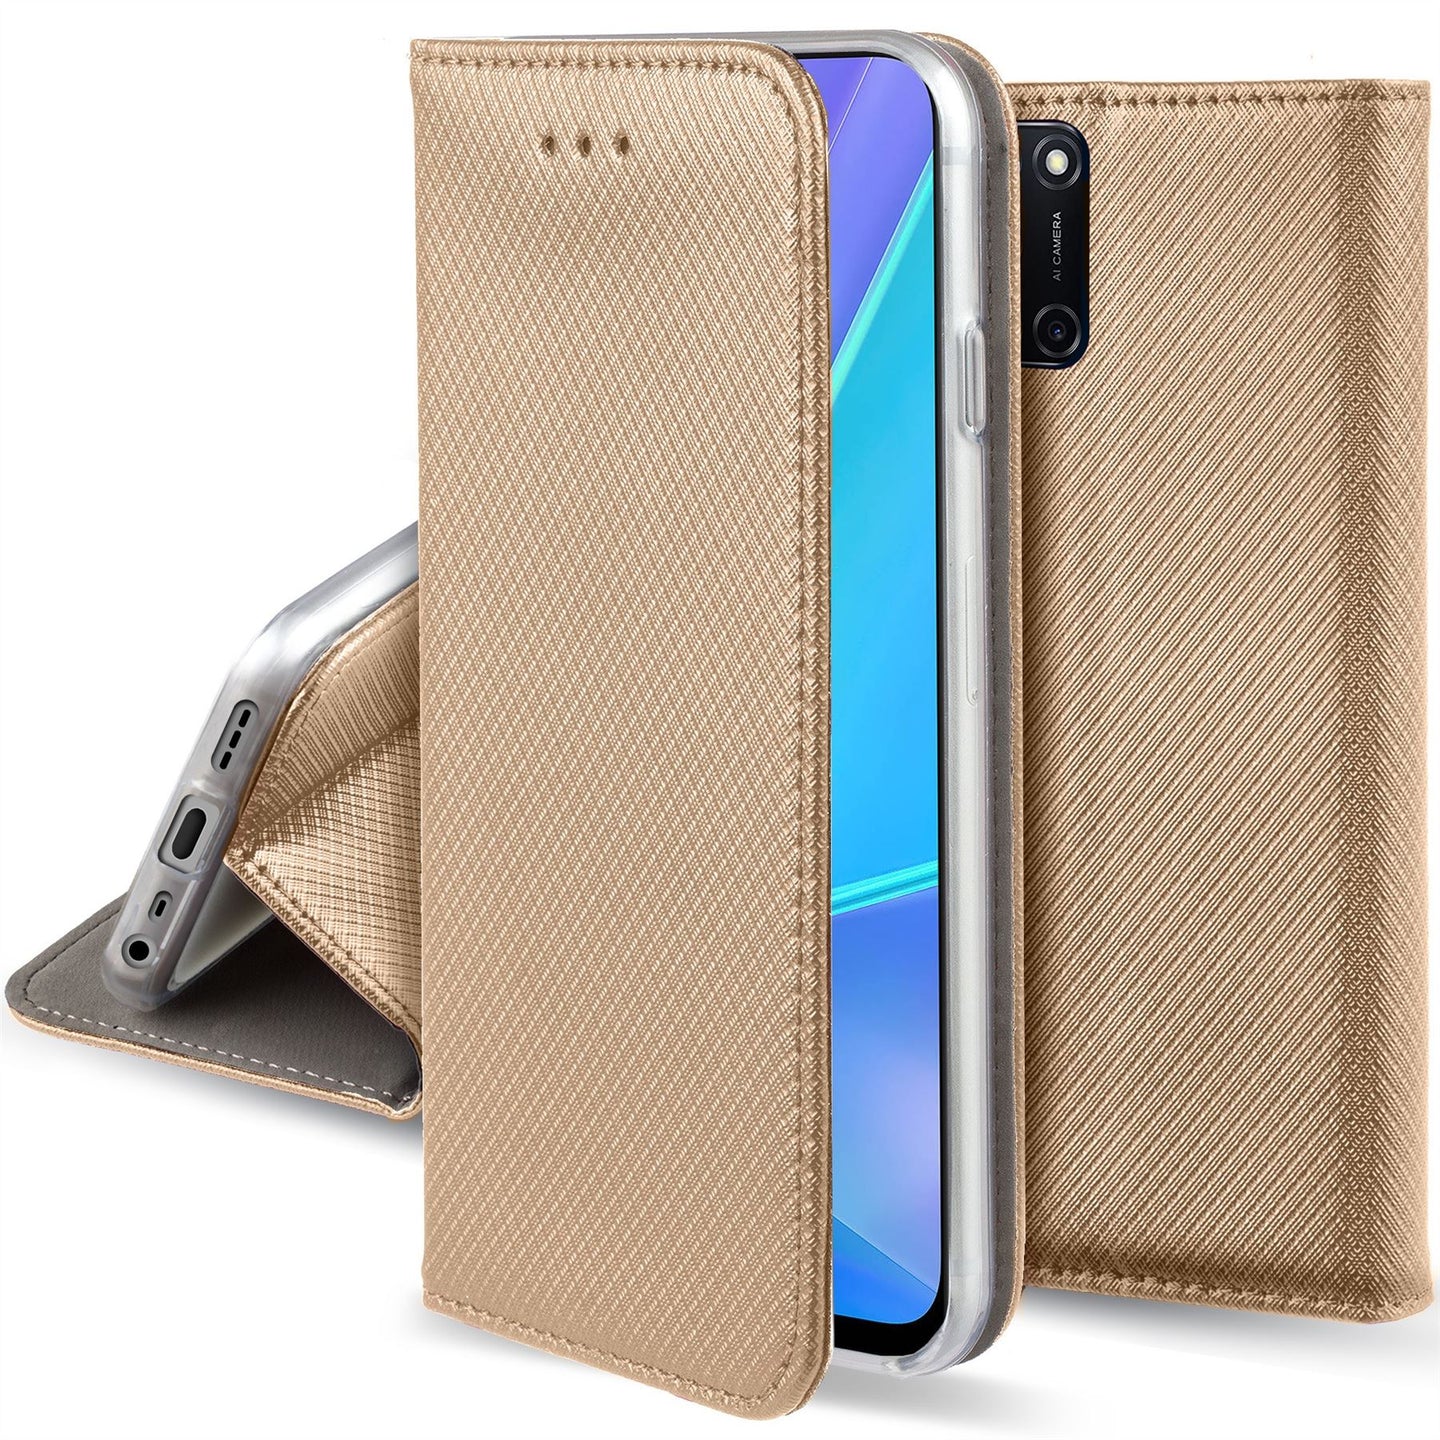 Moozy Case Flip Cover for Oppo A72, Oppo A52 and Oppo A92, Gold - Smart Magnetic Flip Case with Card Holder and Stand